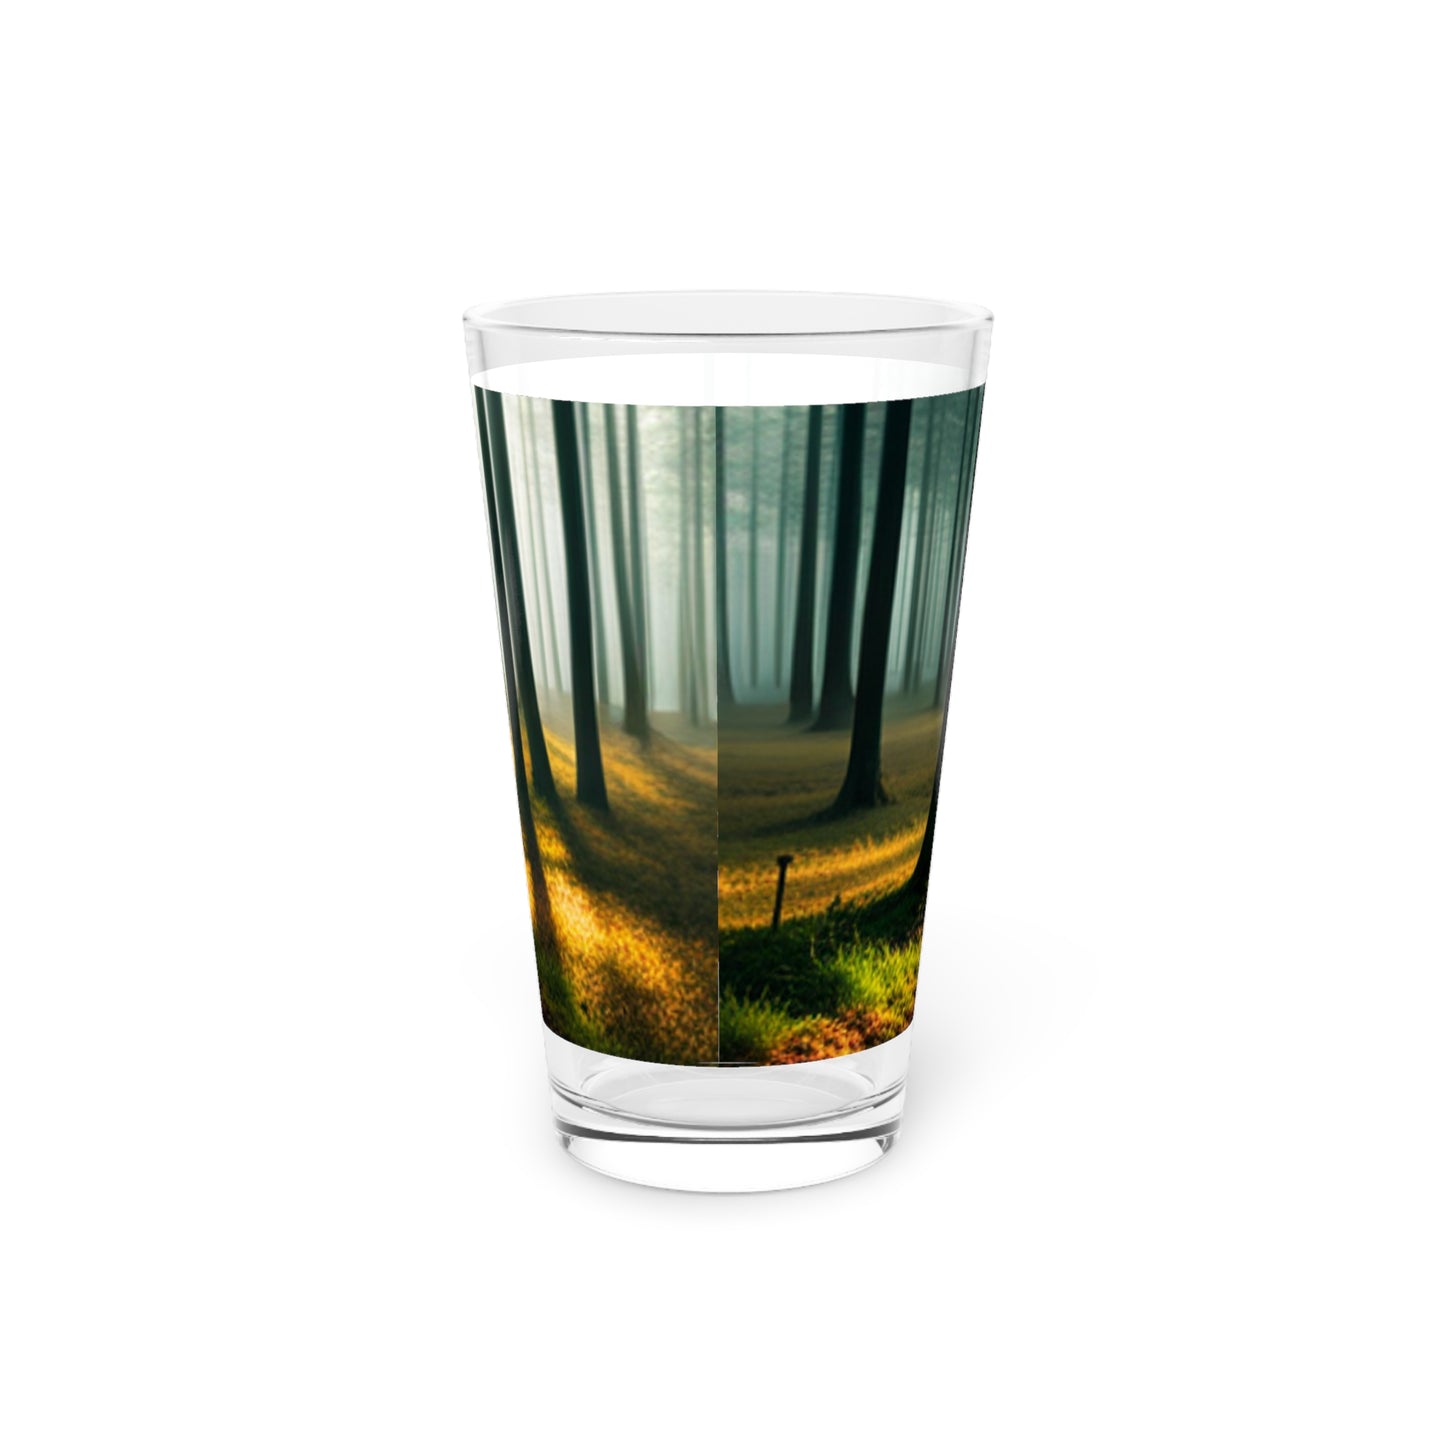 Go Where There Is No Path - Pint Glass, 16oz